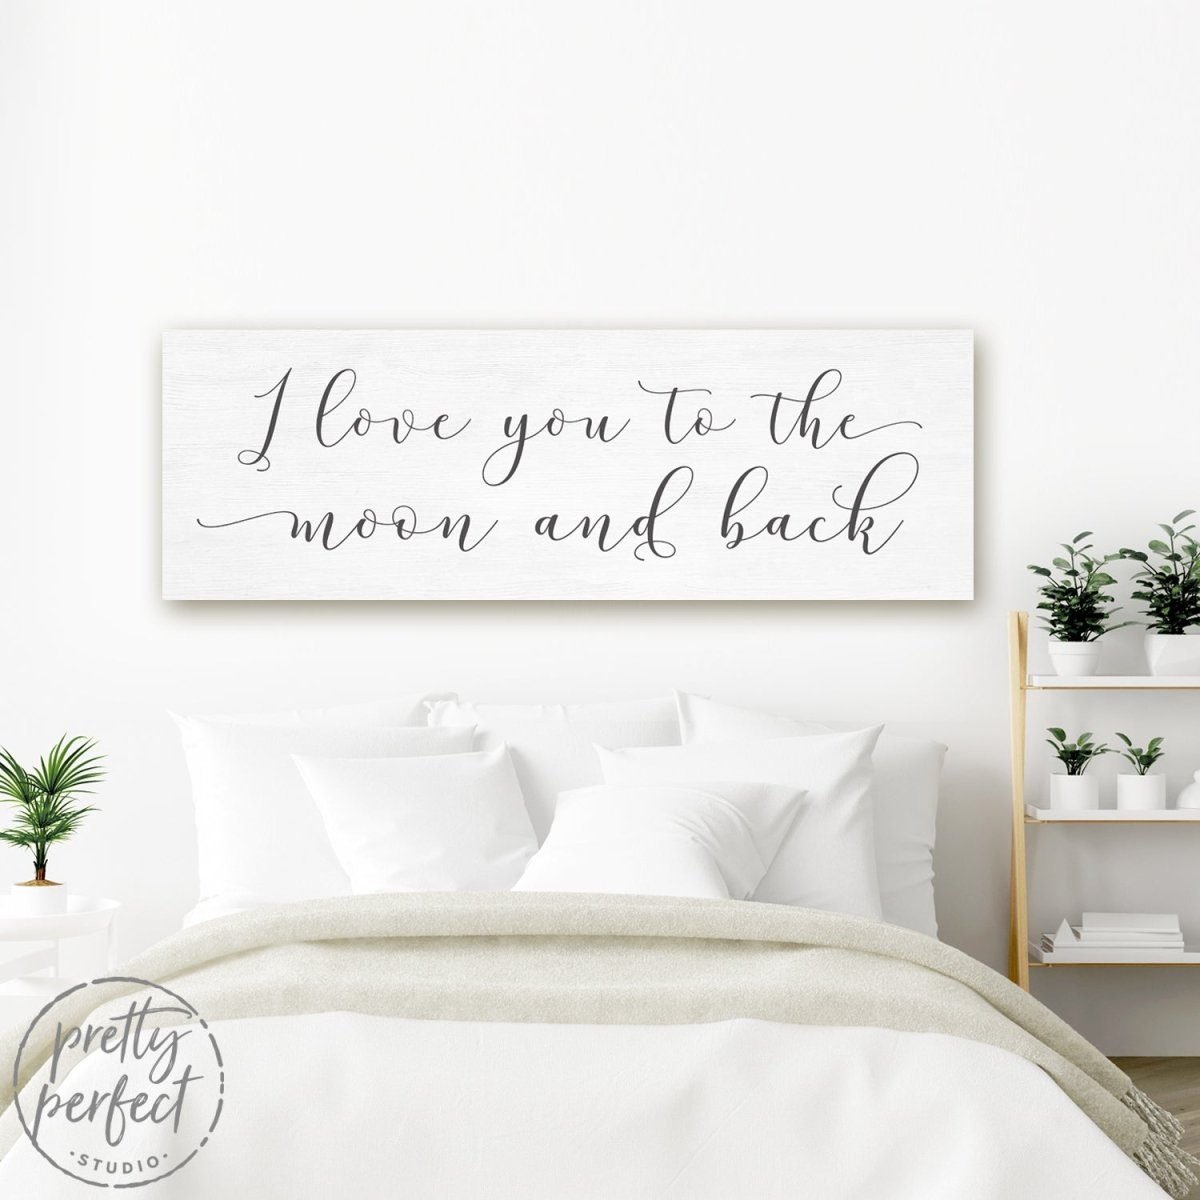 Love You To The Moon And Back Sign Above Bed in Couples Bedroom - Pretty Perfect Studio